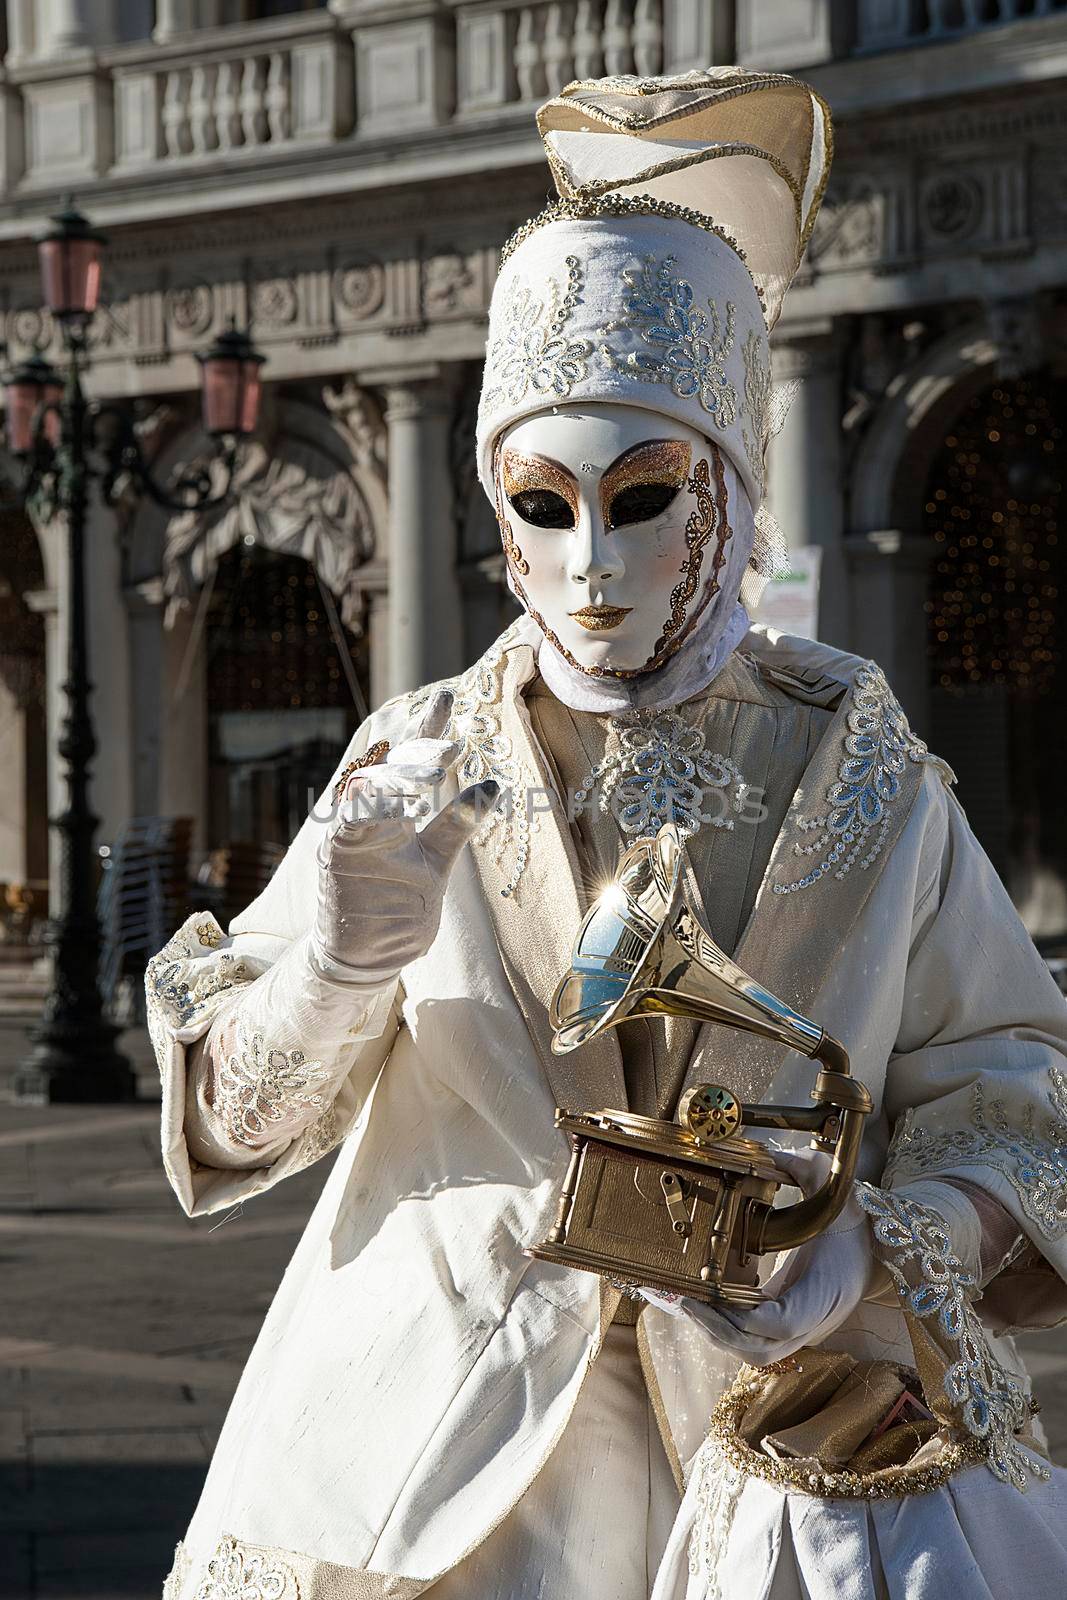 Venice carnival 2020 by Giamplume